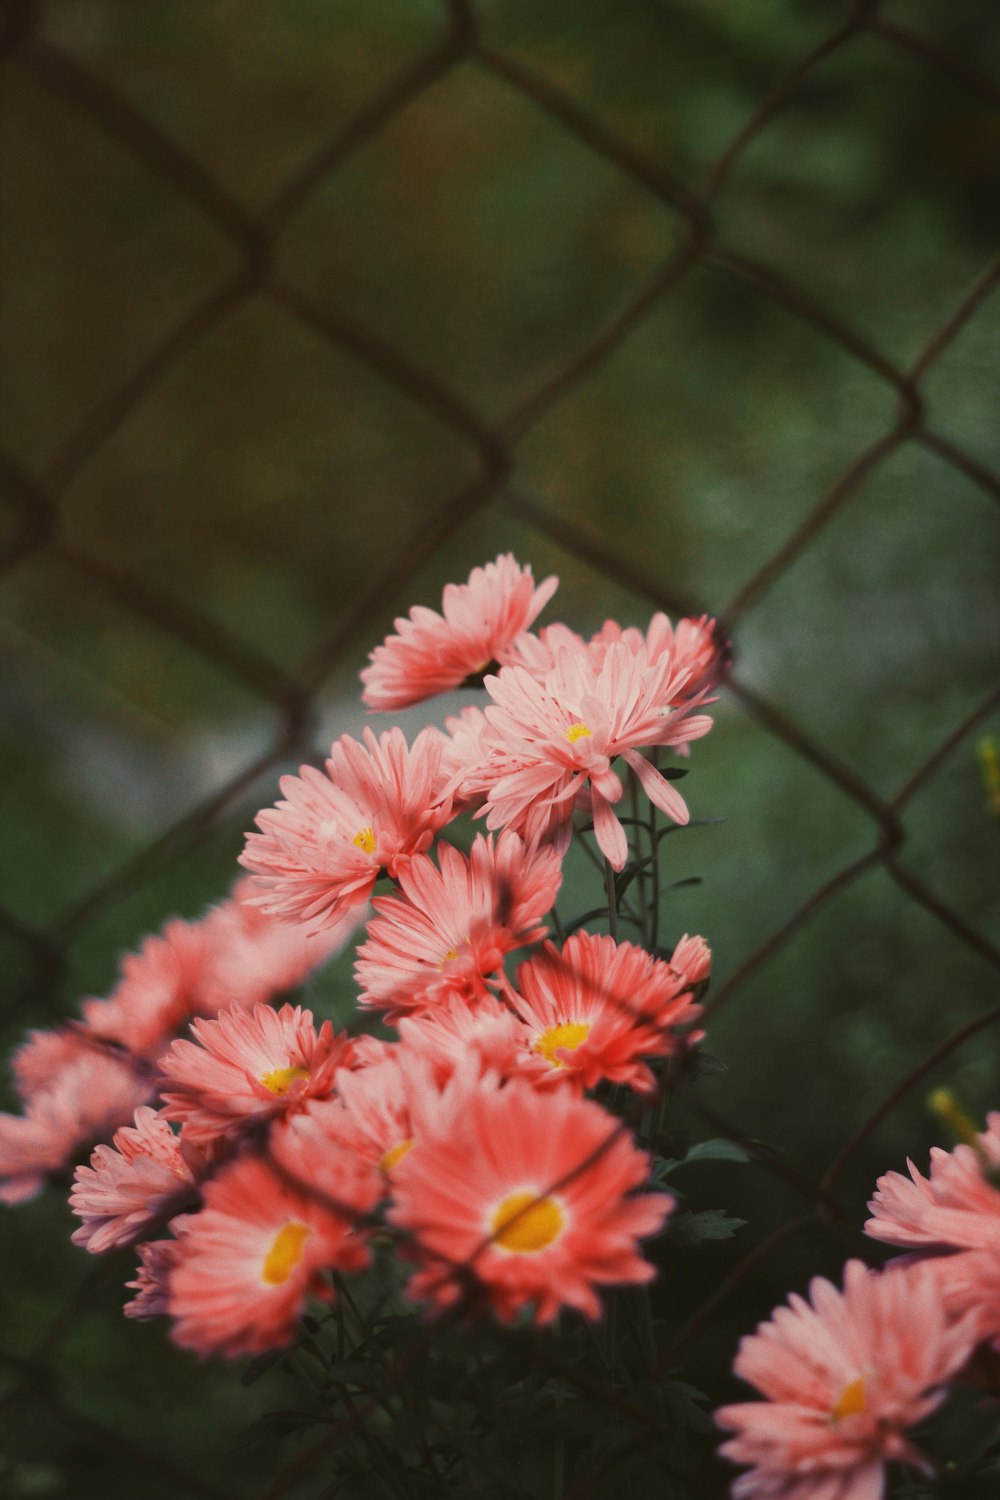 a bunch of pink flowers behind a chain link fence